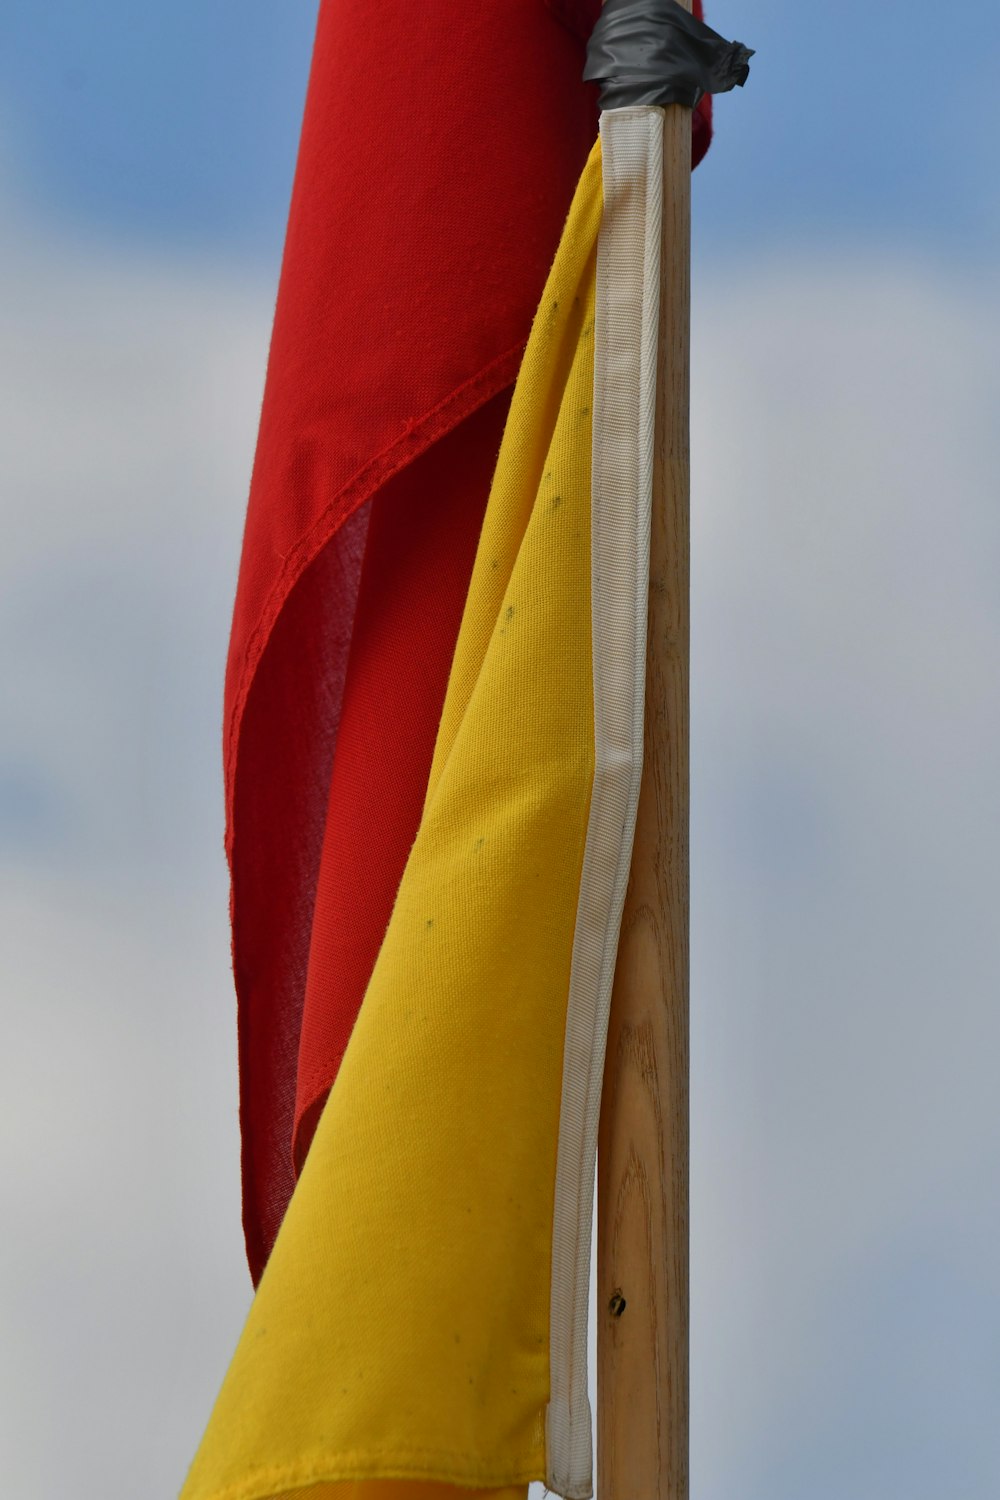 a close up of a red and yellow flag